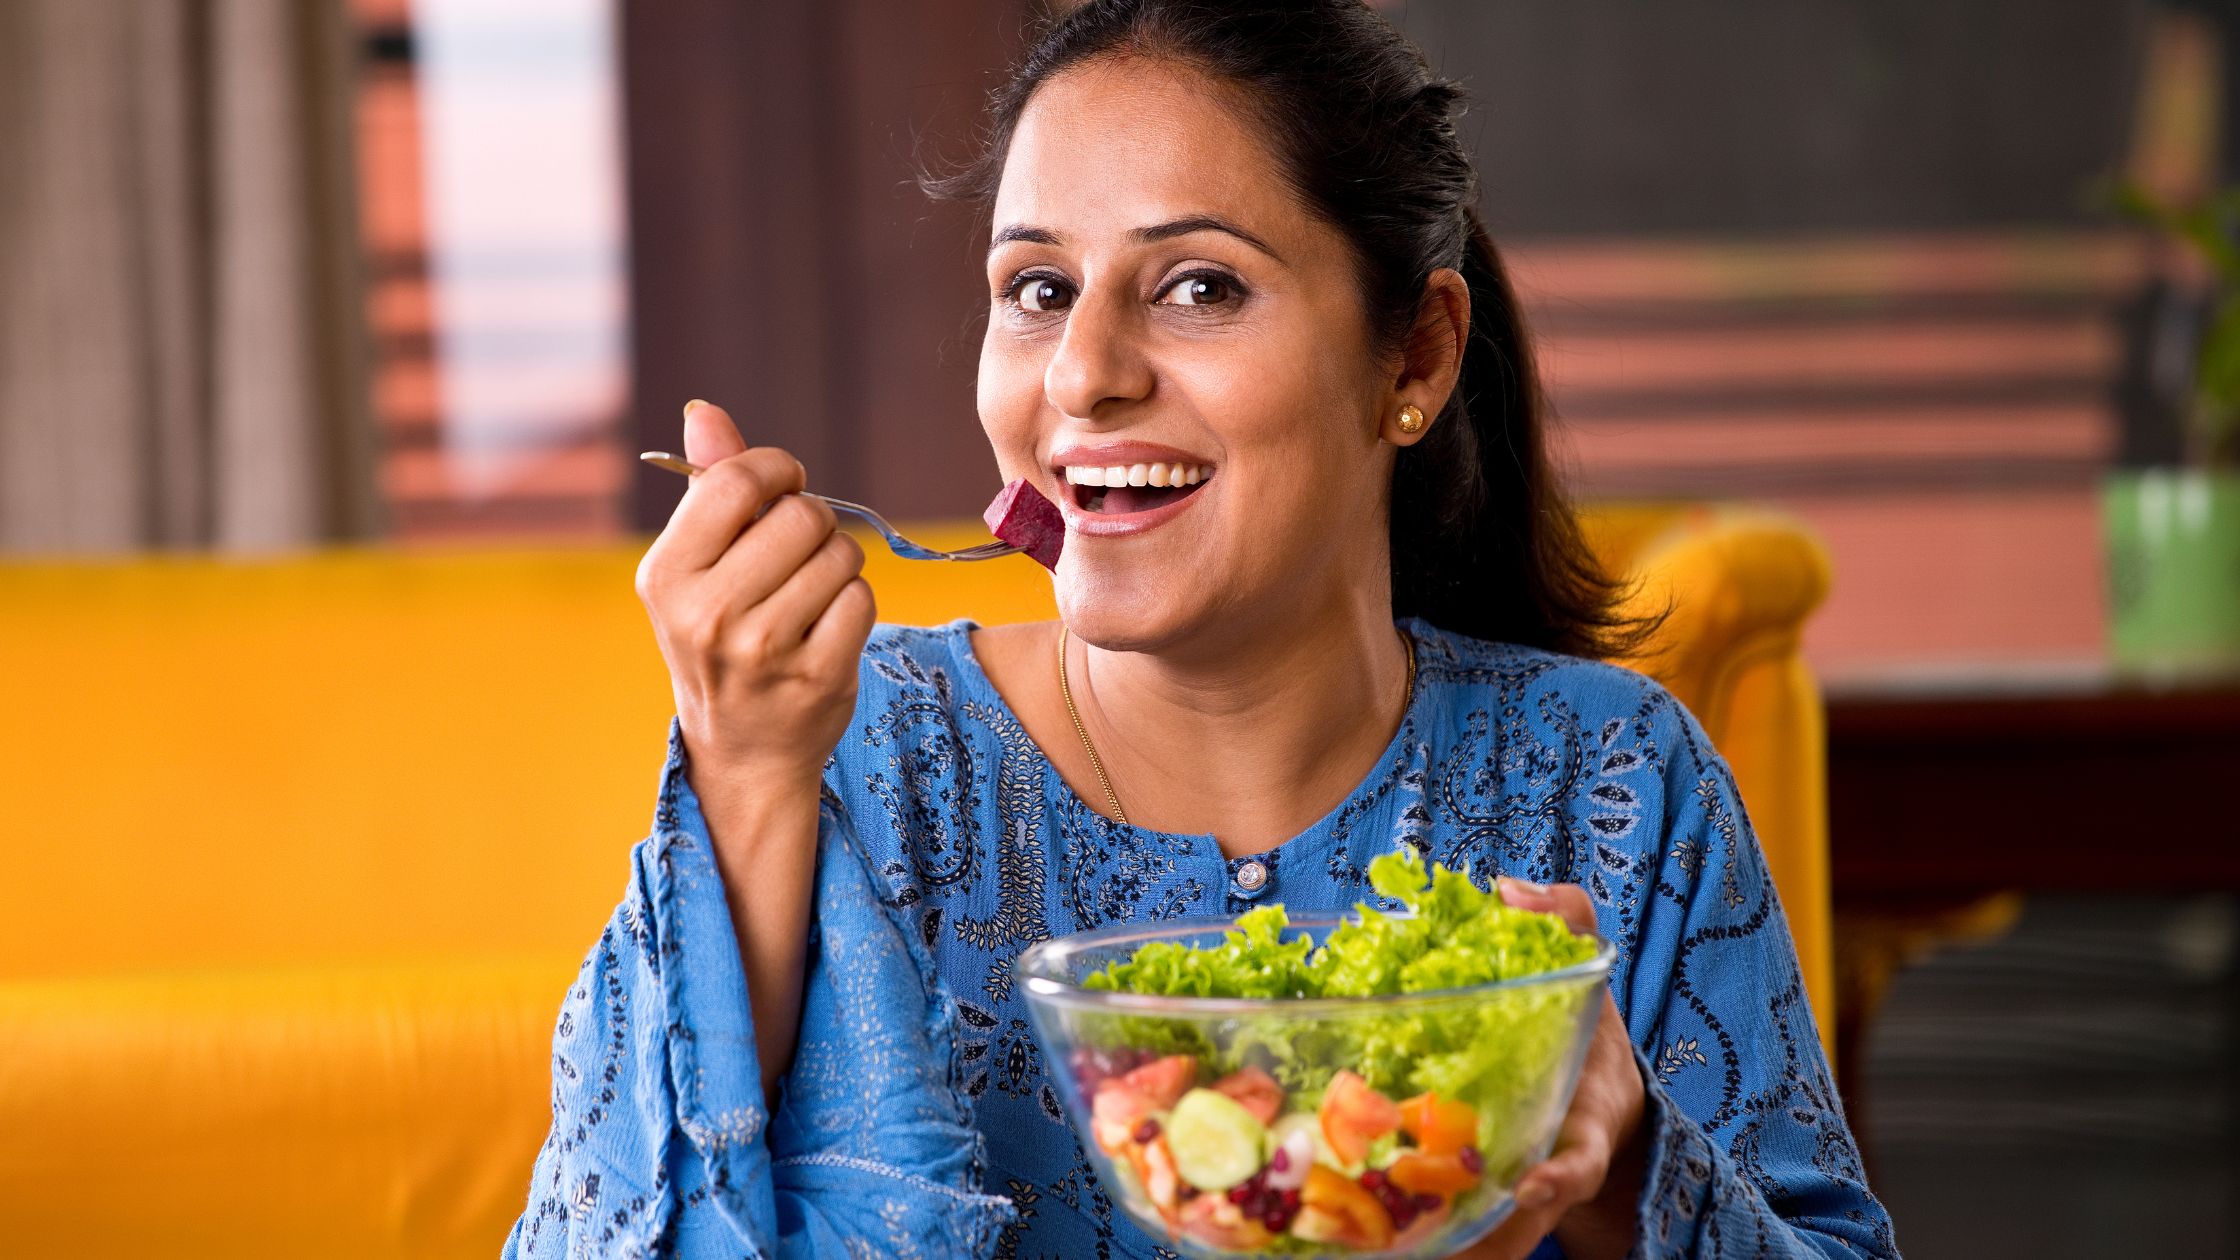 Nutrition and Oral Health - Woman eating salad